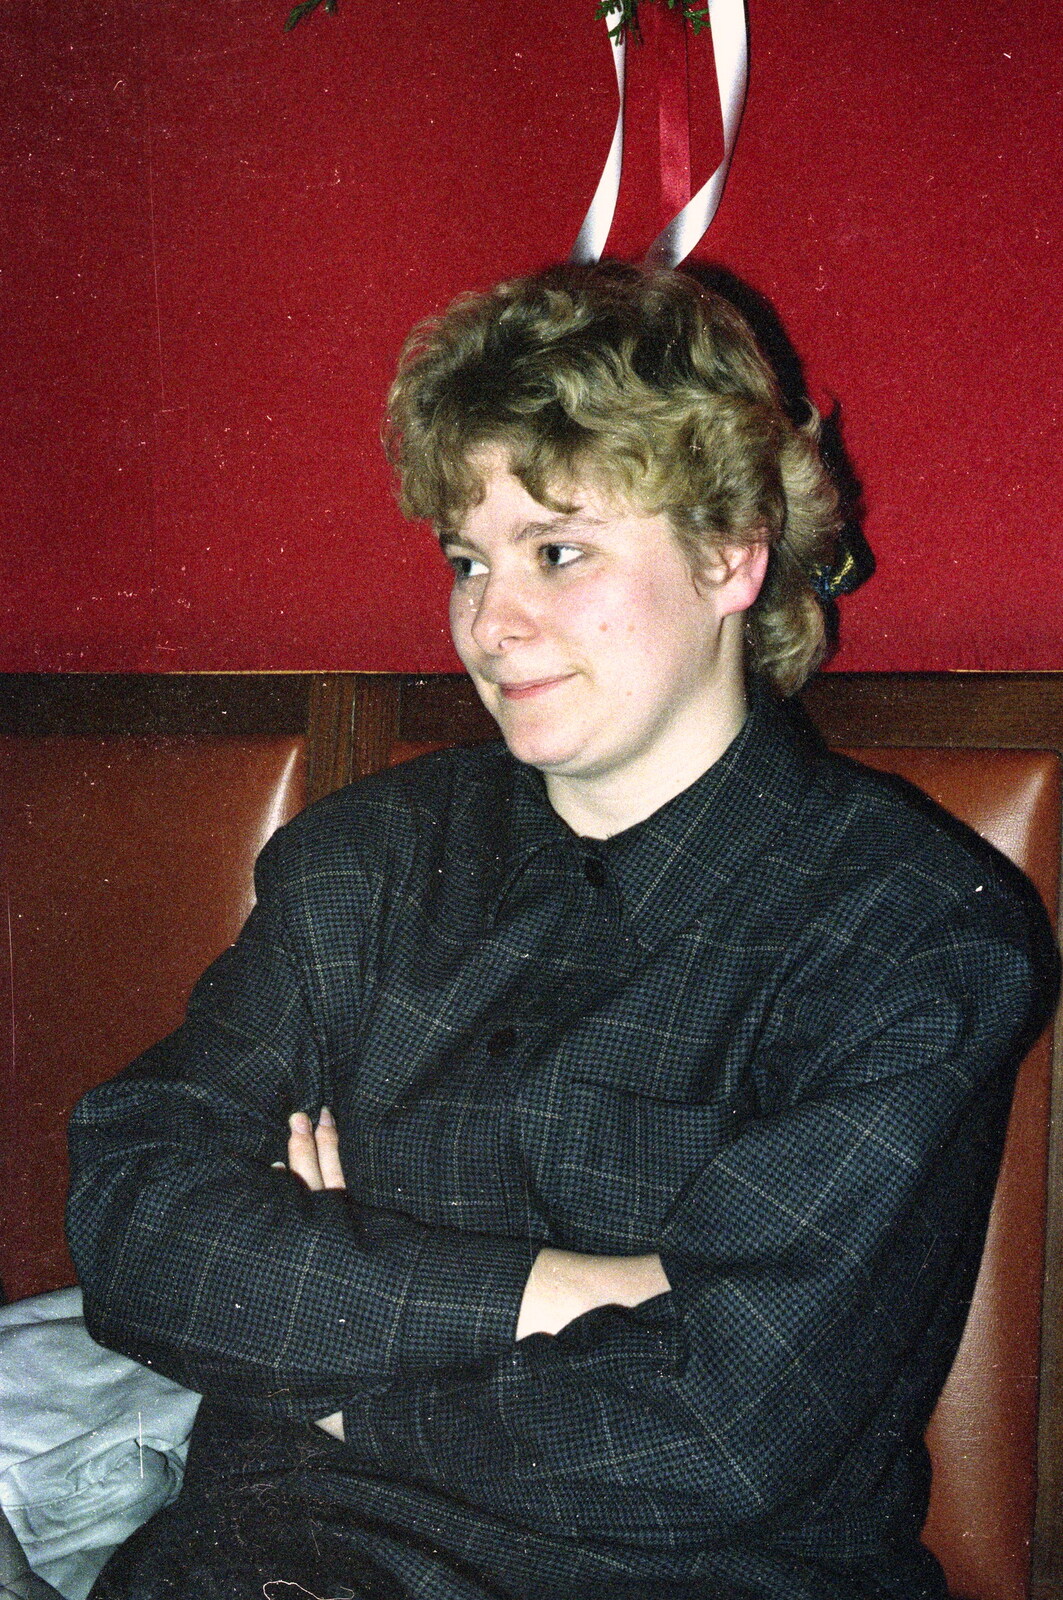 Anna in The Amberwood from New Year's Eve at Anna's, Walkford, Dorset - 31st December 1985